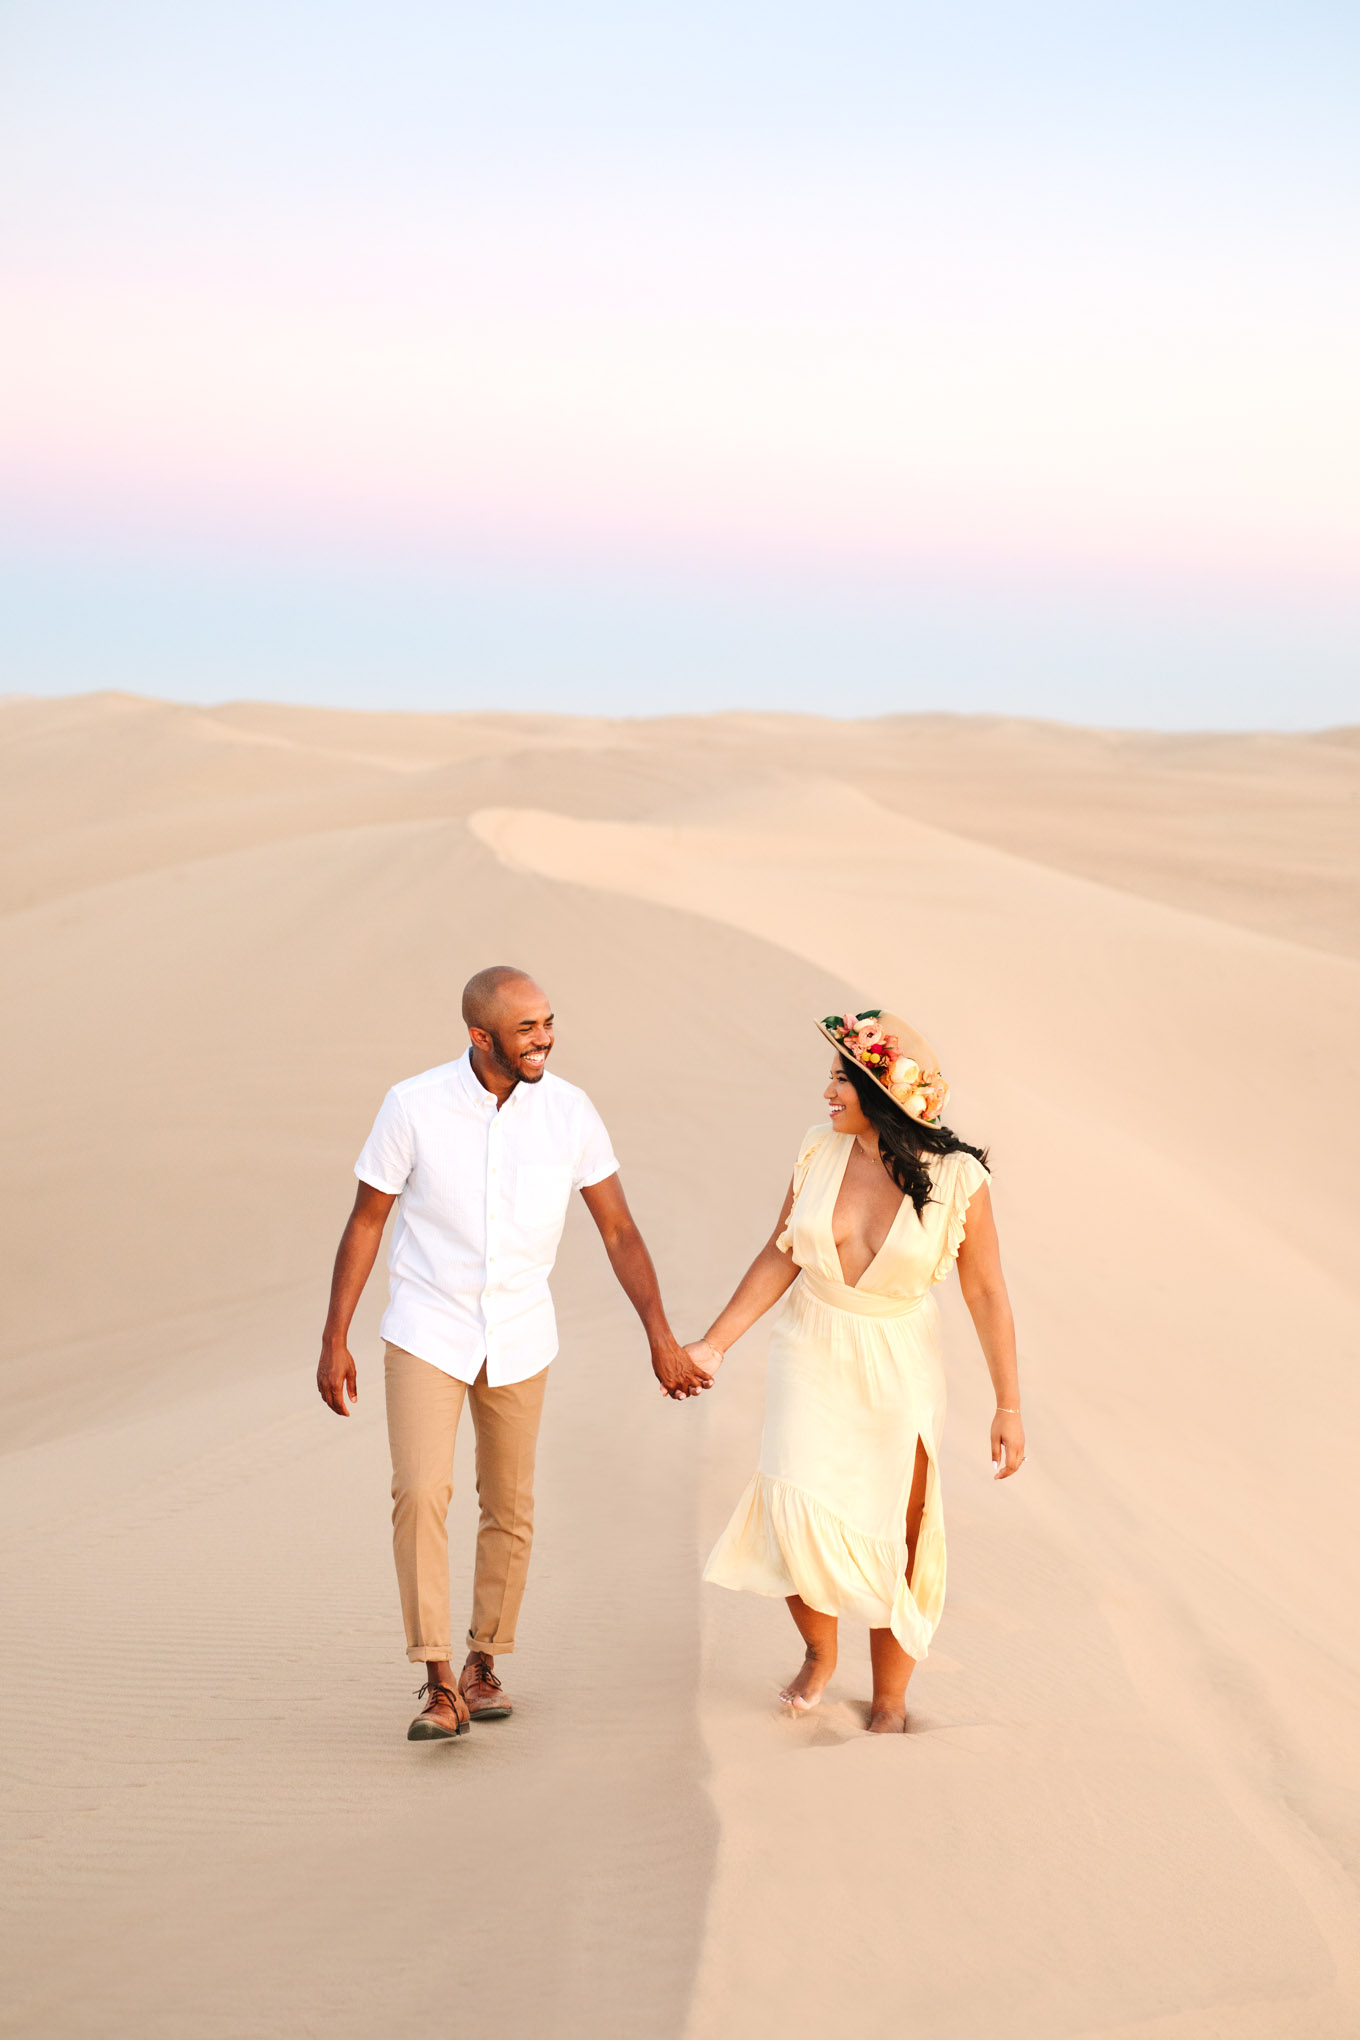 Engaged couple walking the along a sand dune at sunset | California Sand Dunes engagement session | Colorful Palm Springs wedding photography | #palmspringsphotographer #sanddunes #engagementsession #southerncalifornia  Source: Mary Costa Photography | Los Angeles